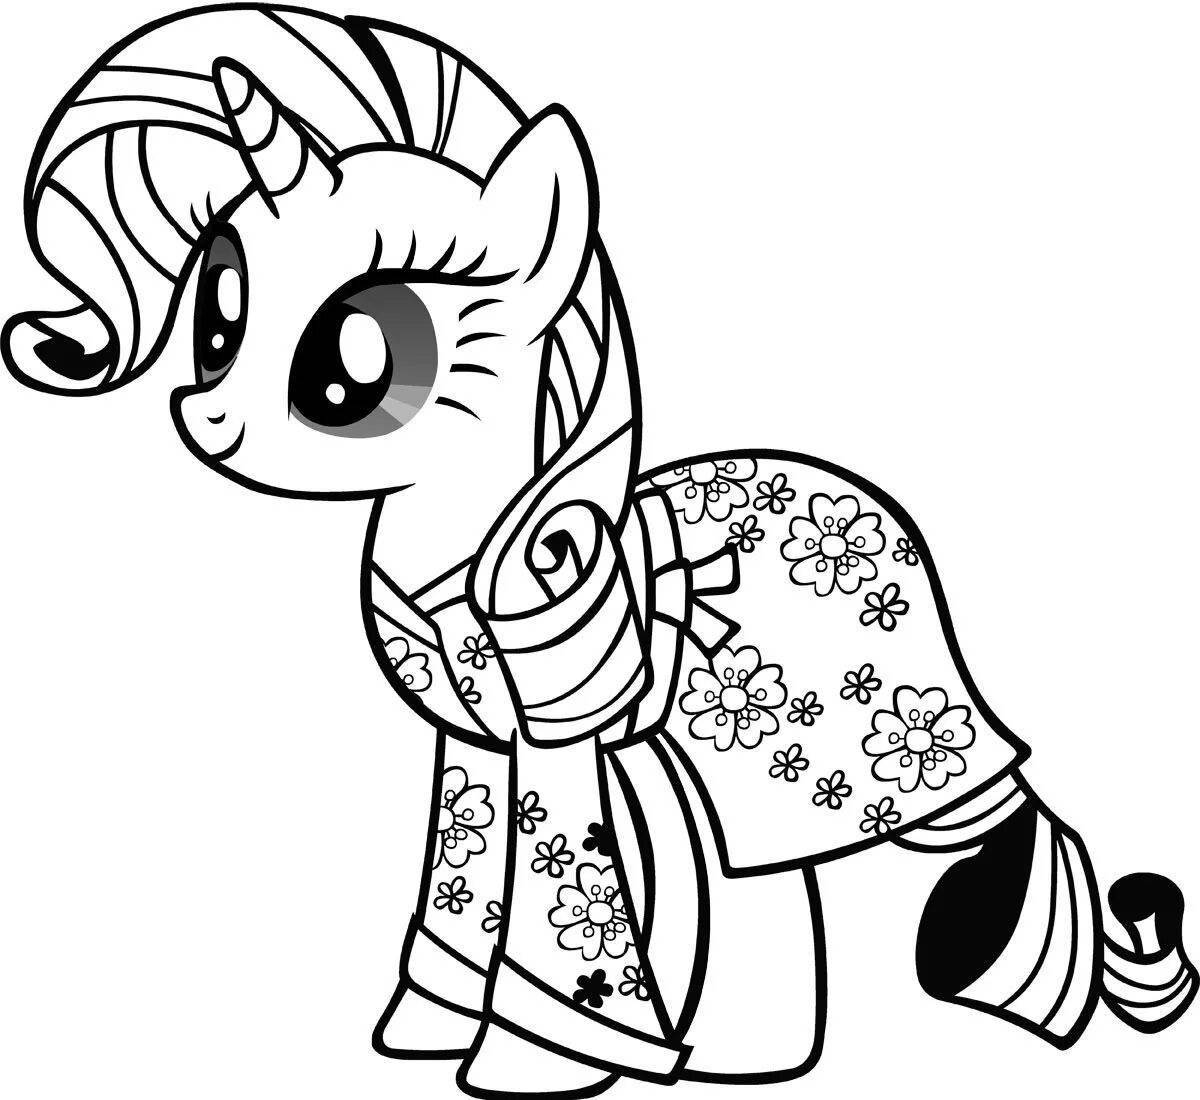 Majestic coloring page pony in dress